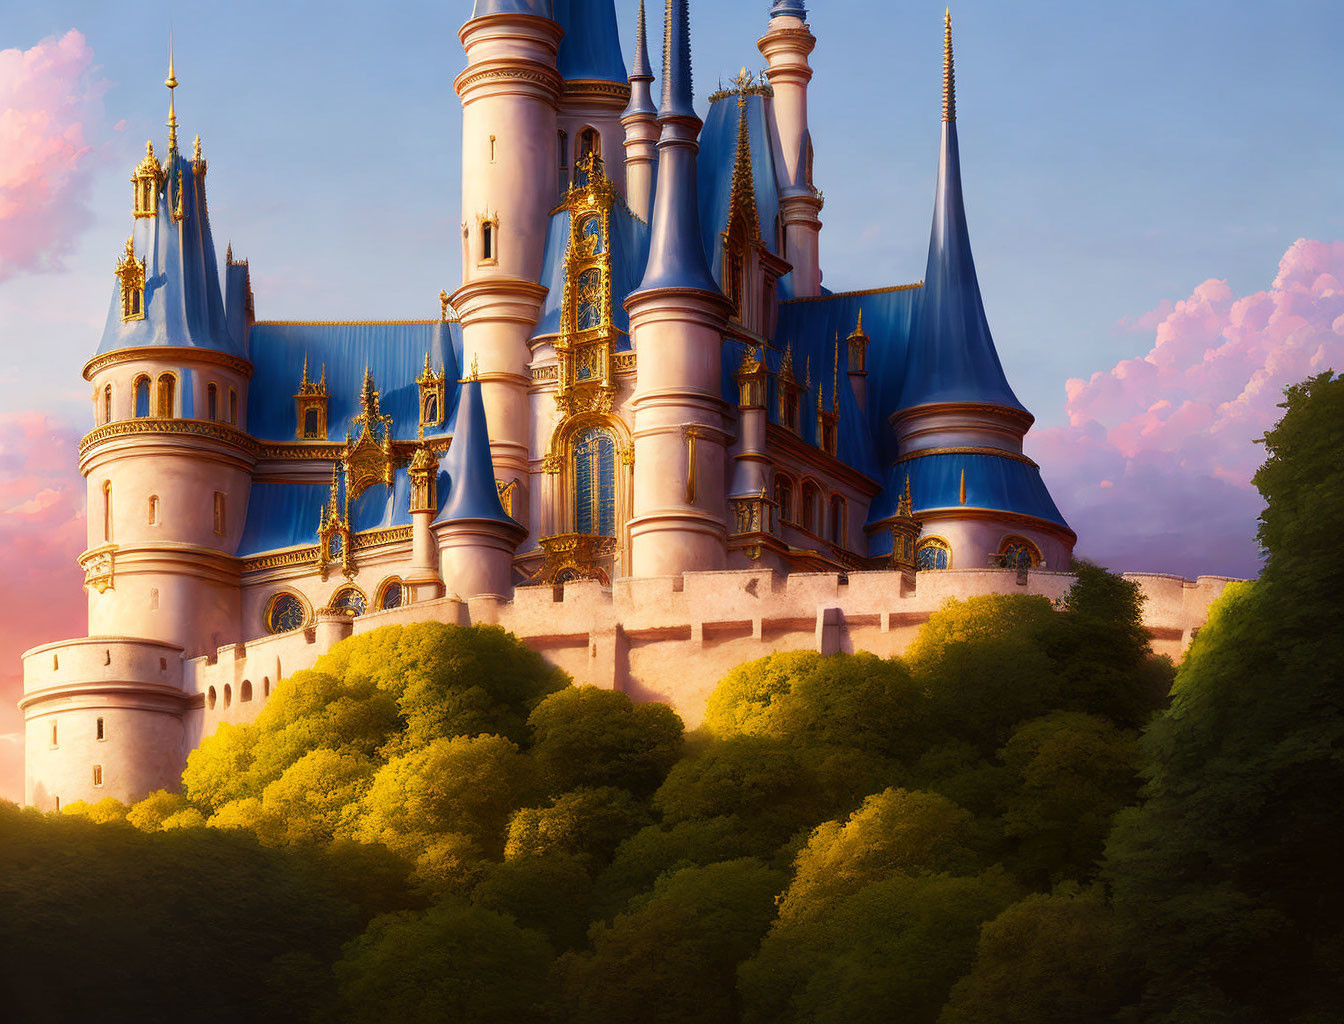 Majestic castle with tall spires in sunset sky and lush greenery.